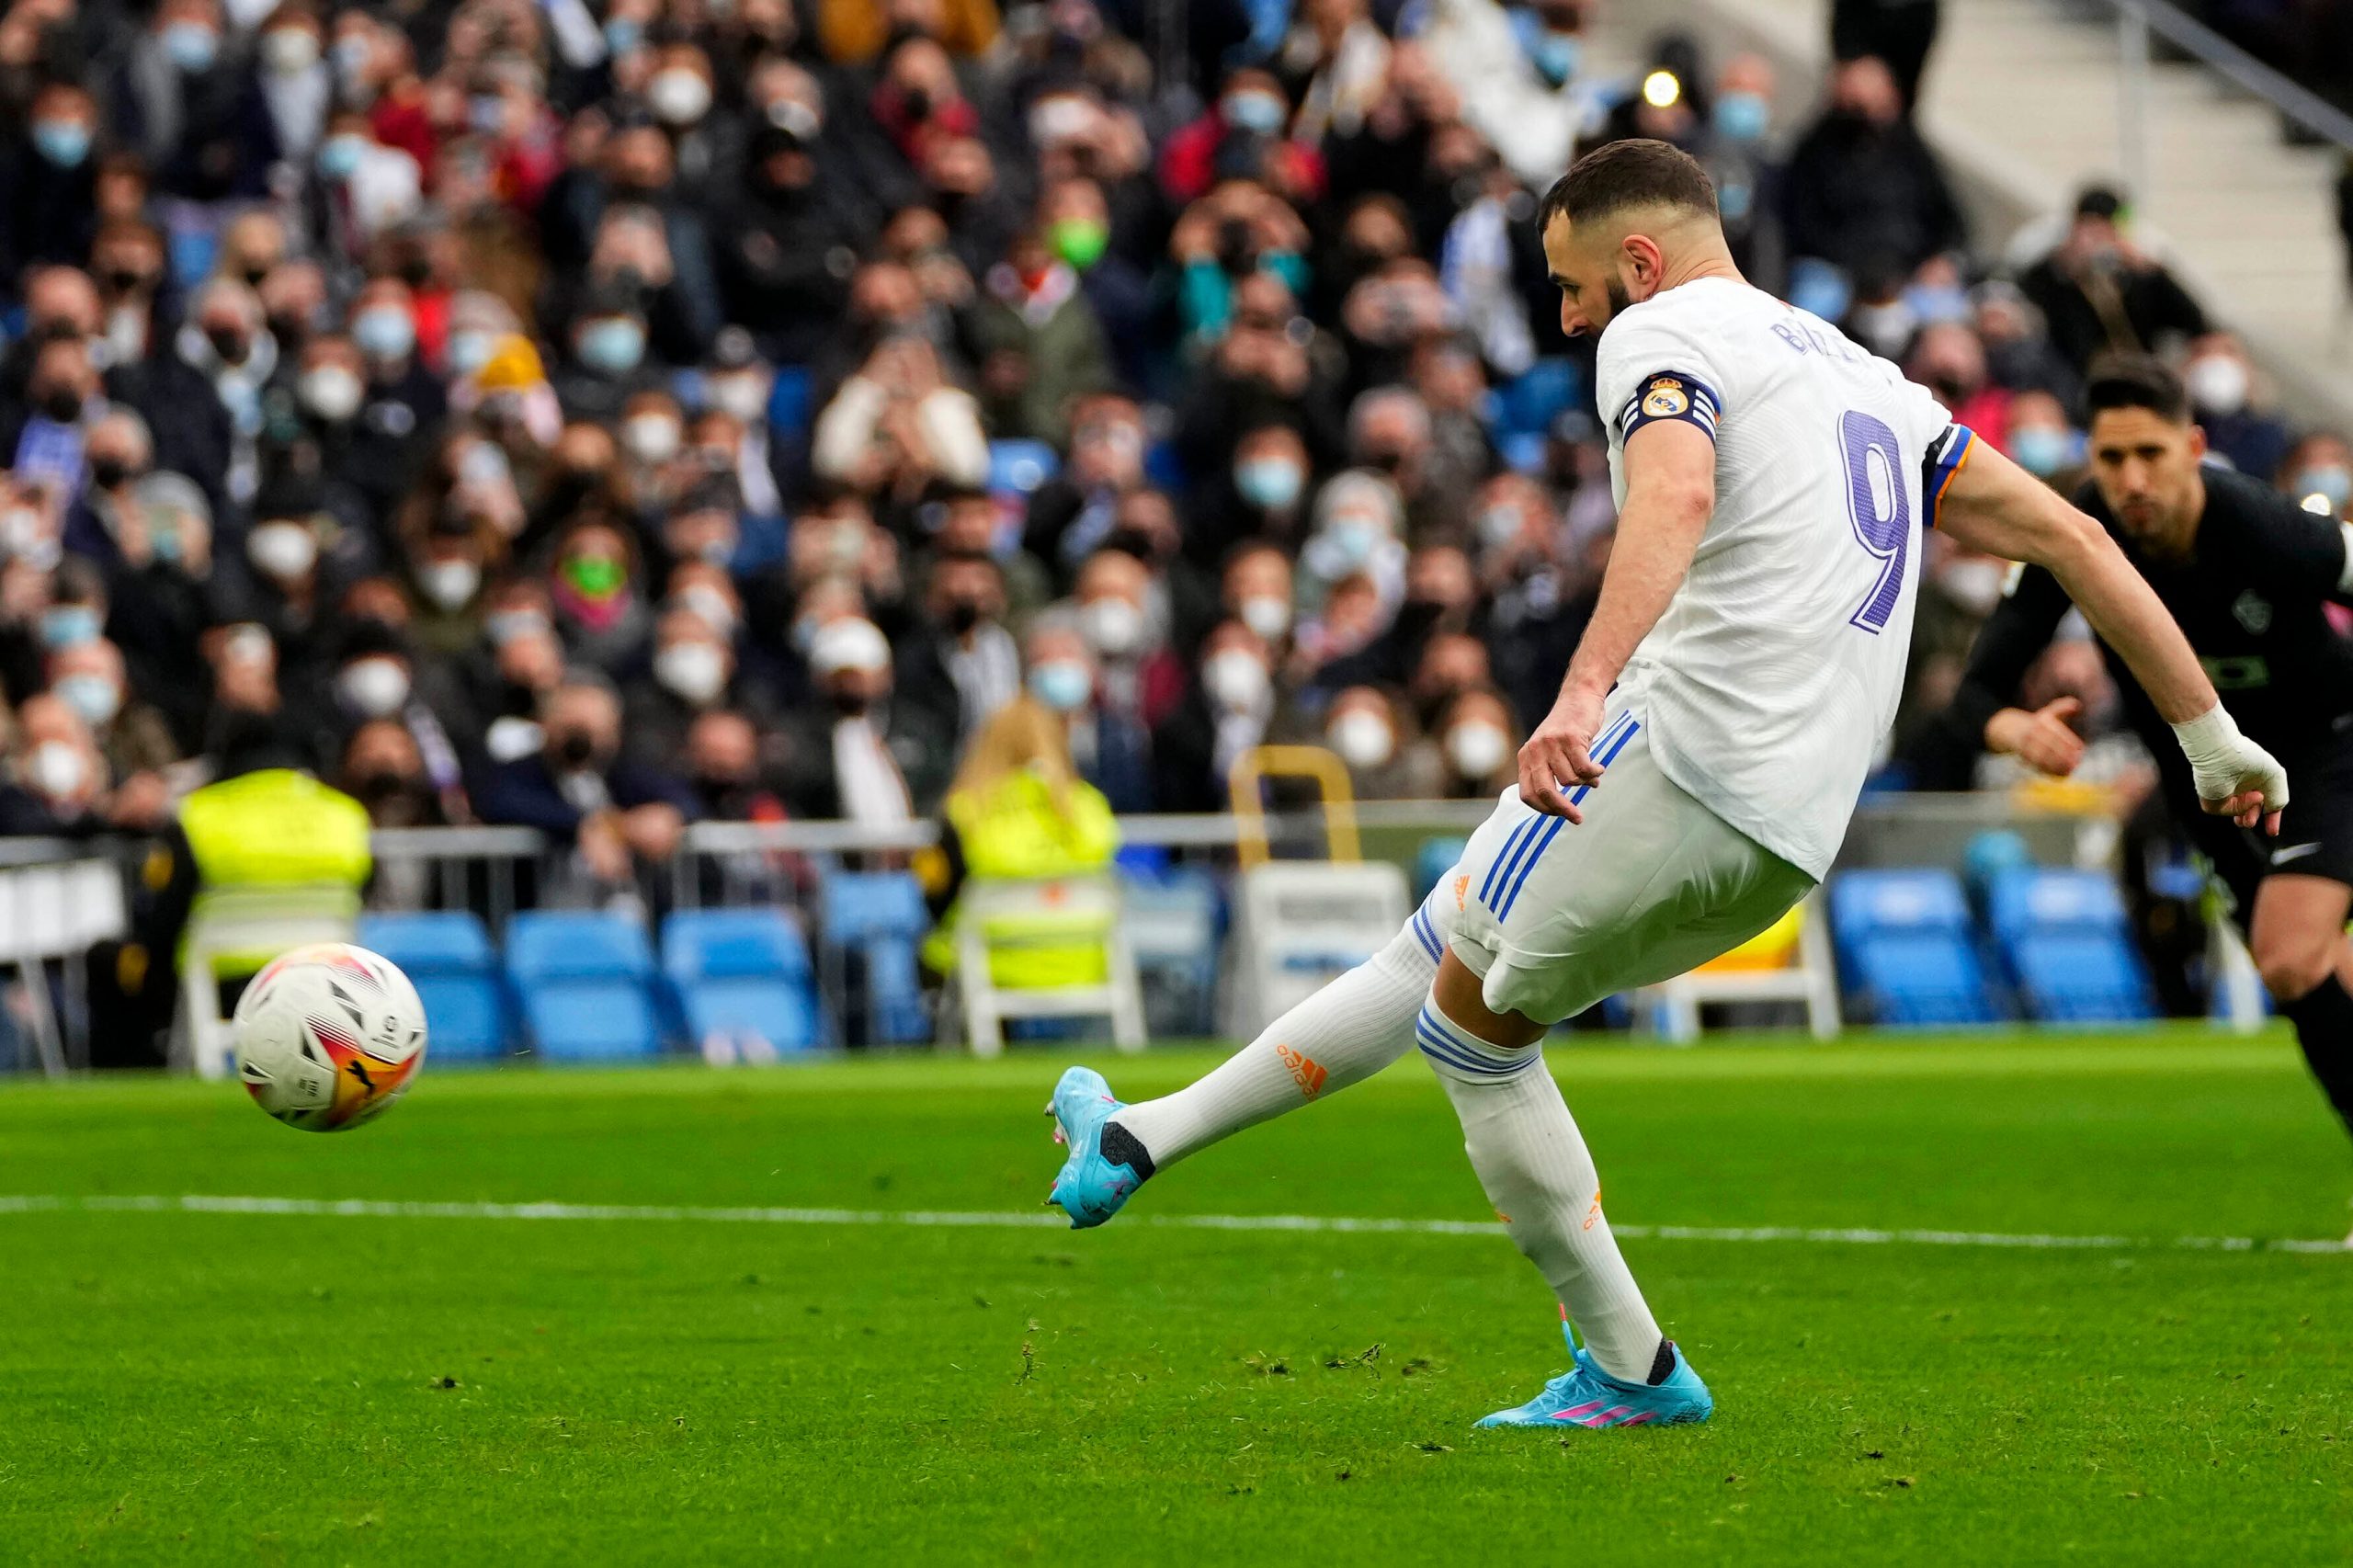 Bad day for Benzema: Missed penalty, injury, robbery plague Real Madrid striker